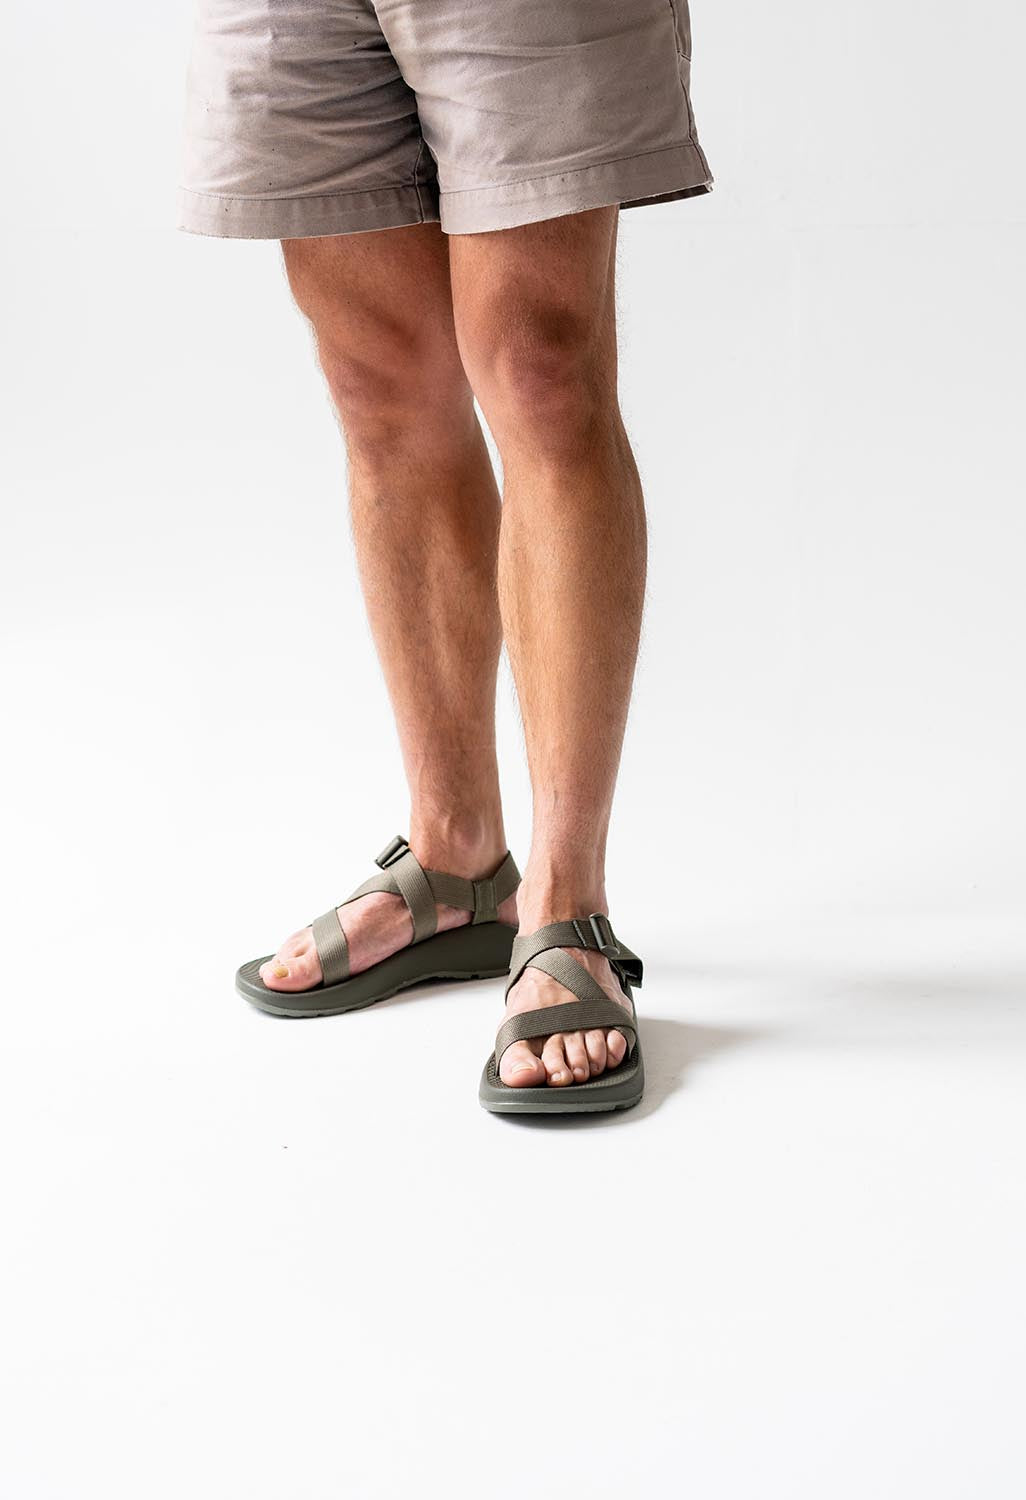 Chaco Z1 Classic Men's Sandals - Olive Night